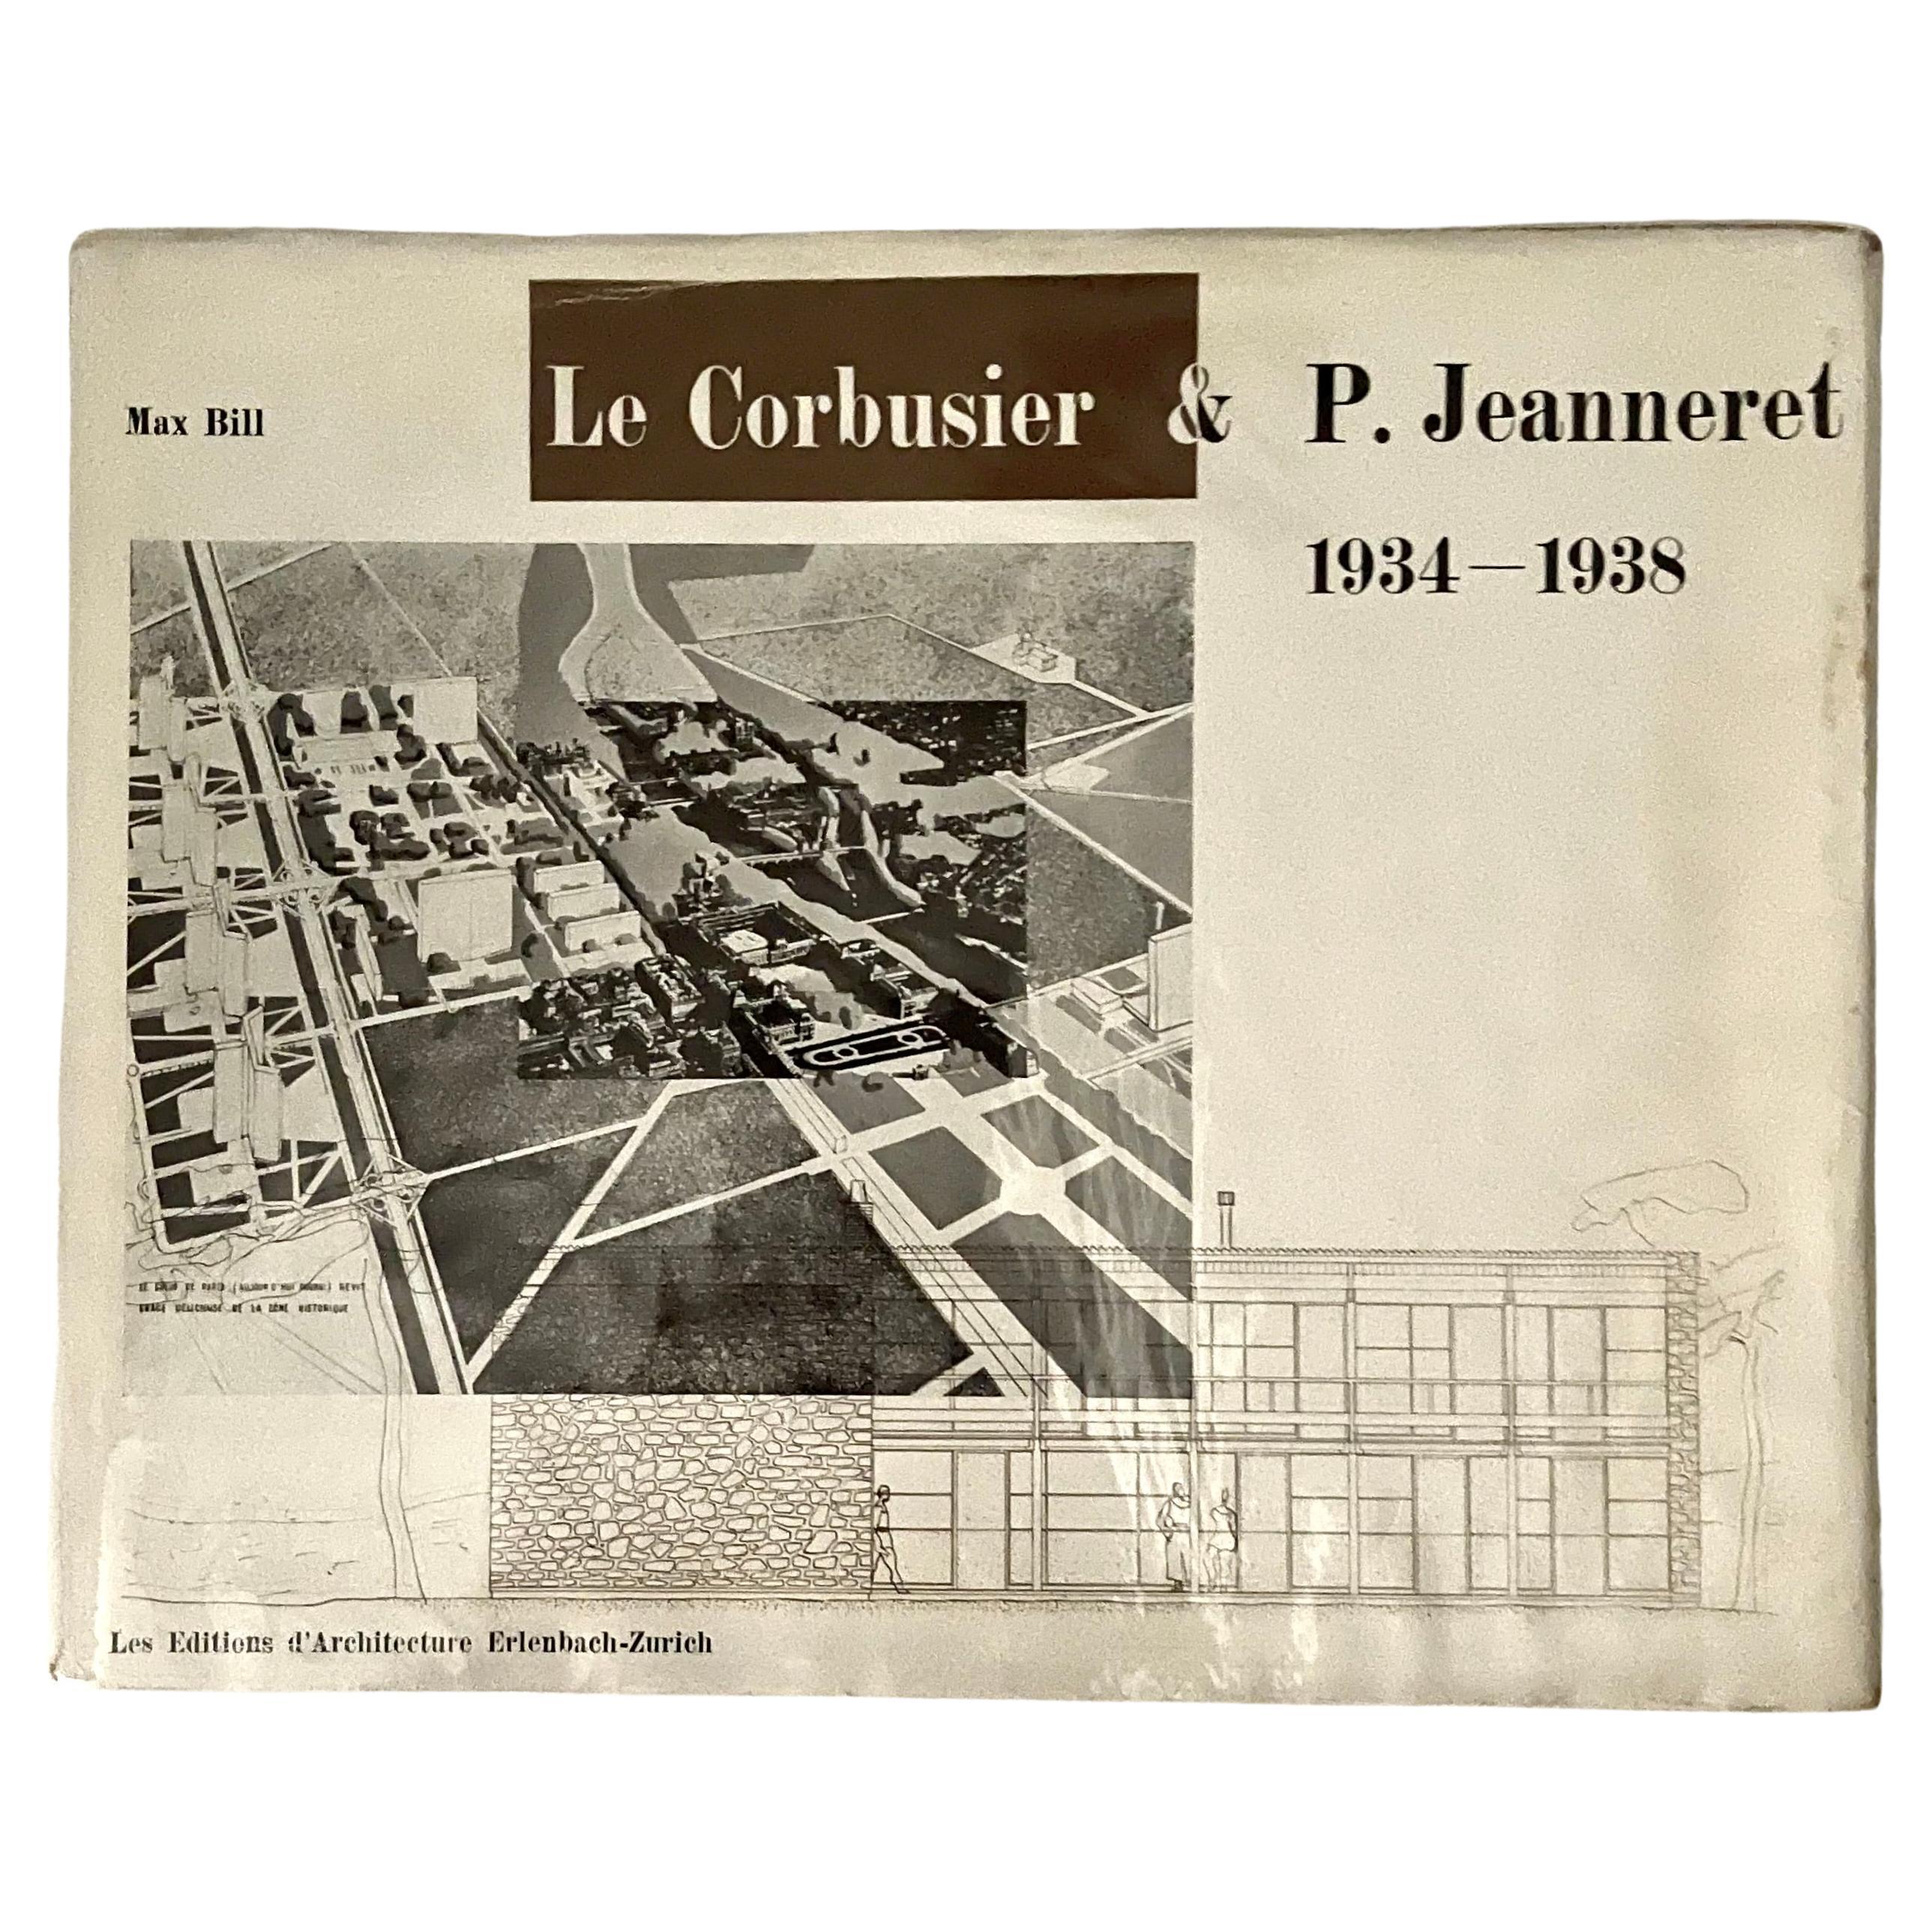 Le Corbusier & P. Jeannette 1934-1938 by Max Bill 3rd Edition 1947 For Sale